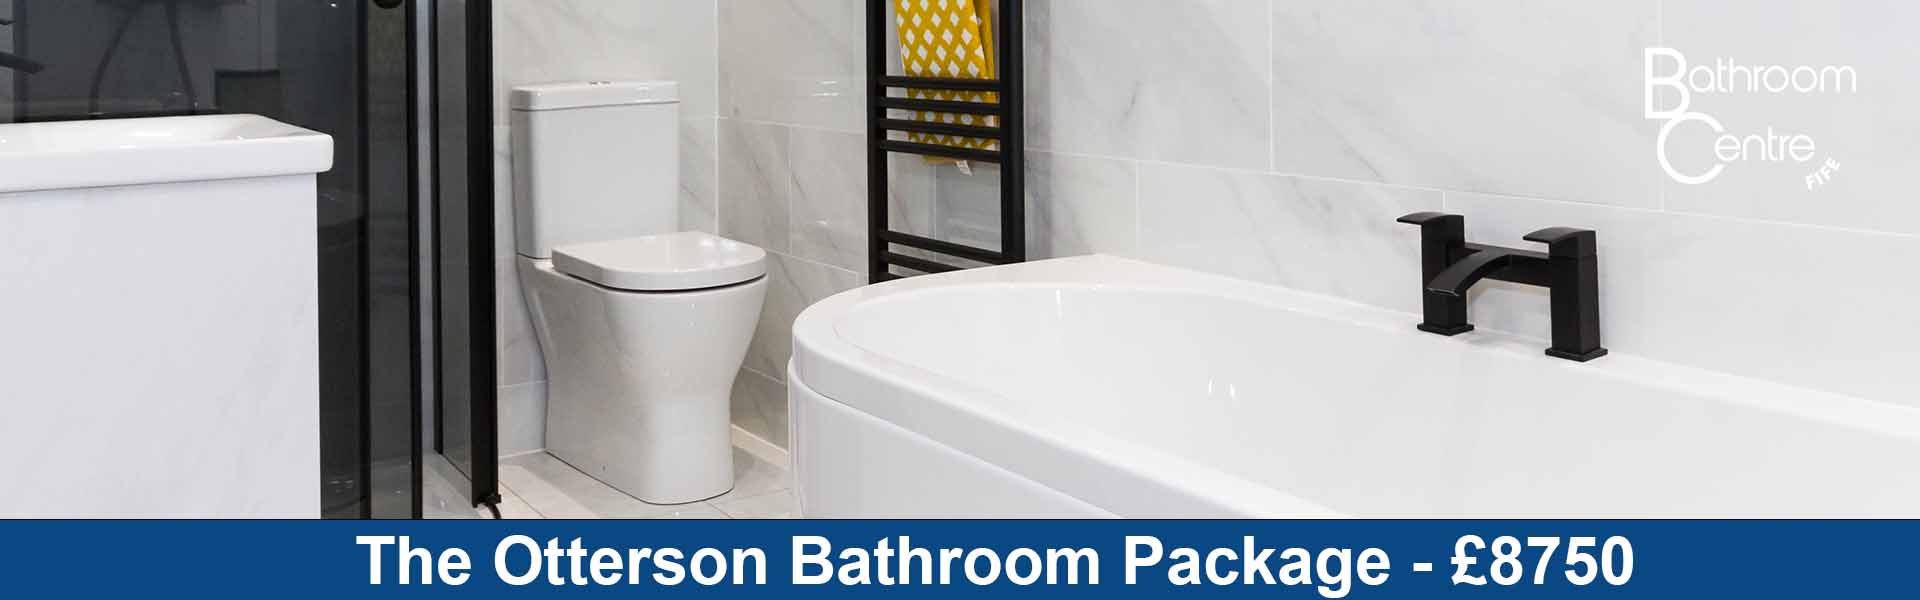 BCF-Bathroom Packages - The Otterston